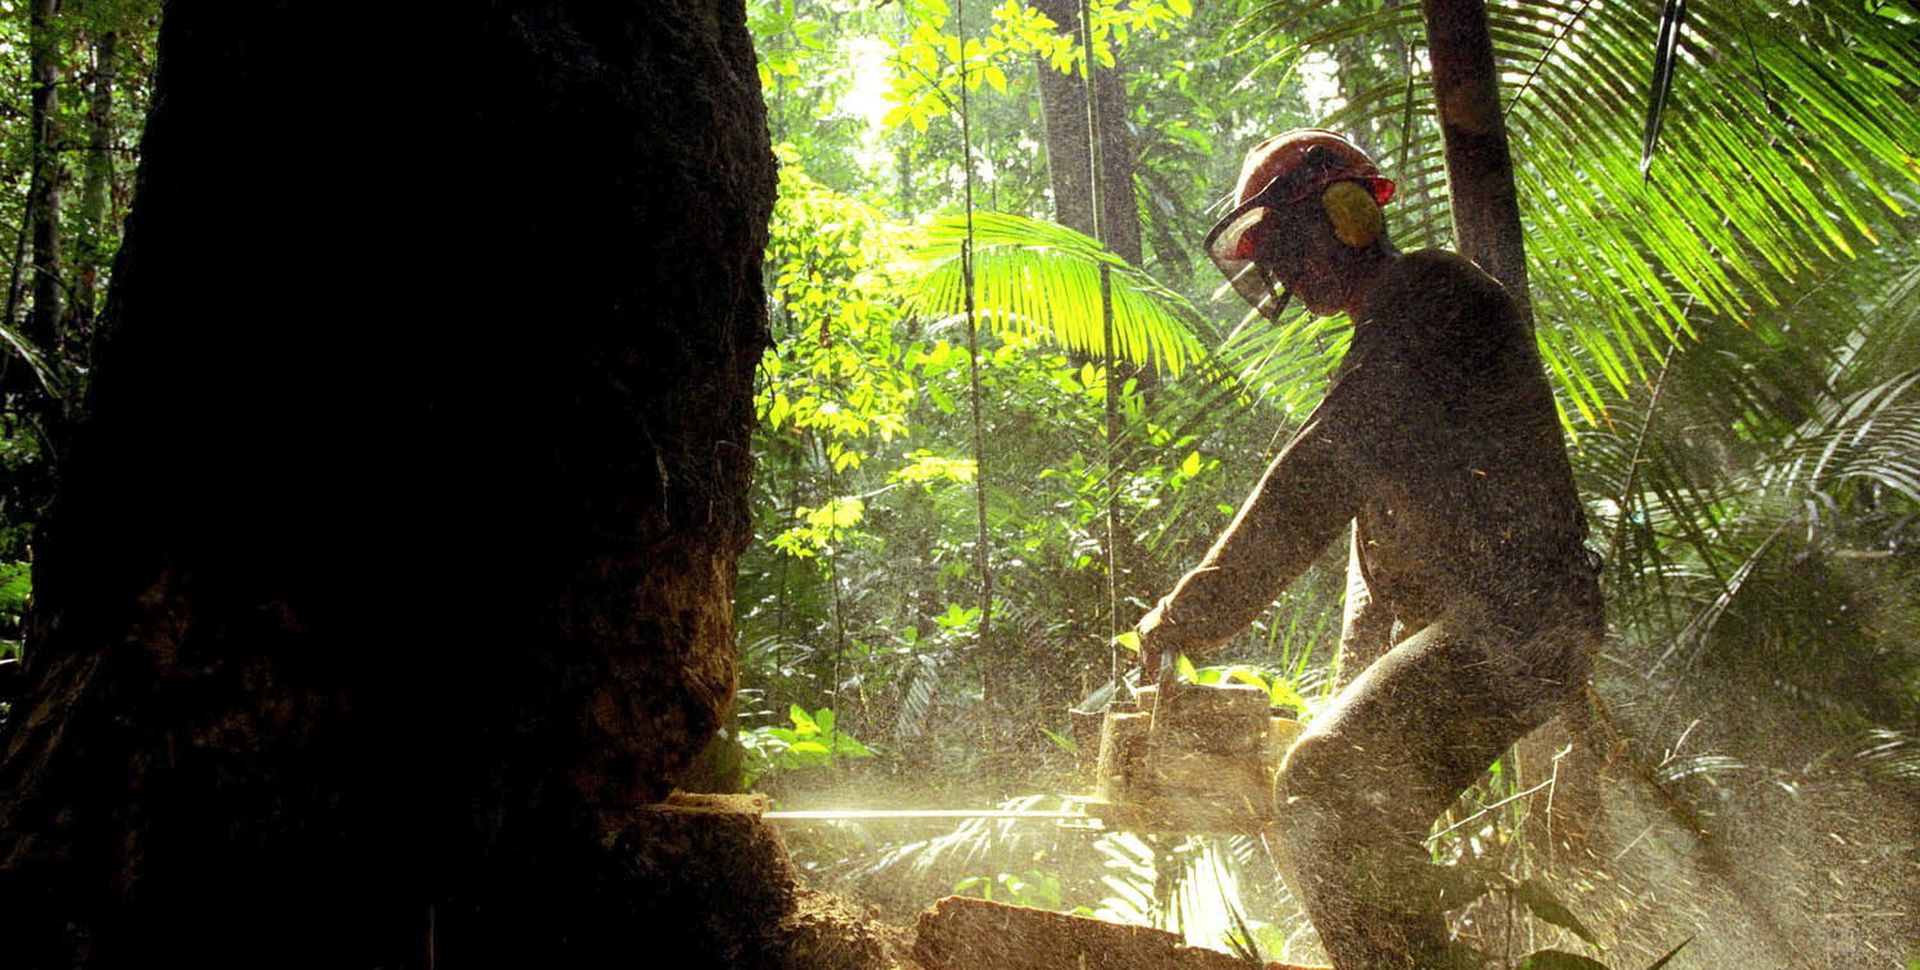 epa07772662 An undated image made available on 14 August 2019 shows a worker cuts down a tree in the Amazon forest in Brazil (issued 14 August 2019). Deforestation in the Brazilian Amazon reached 2,254.8 square kilometers in July 2019, an area 278 percent larger compared to the same month last year, according to the National Institute of Space Research (INPE). Inpe had already reported an 88-percent increase in deforestation in June compared to the same month in 2018, data that was publicly questioned by Brazilian President Bolsonaro. The publication led to the dismissal of the institute's head Galvao and the appointment of Darton Policarpo Damiao, a Brazilian Air Force (FAB) officer as interim head. Inpe's publicly accessible Real-Time Amazon Deforestation Detection System (Deter) shows that the deforestation registered in July 2019 is equivalent to more than a third of the total area decimated in the last 12 months.  EPA/MARCELO SAYAO Brazil Out